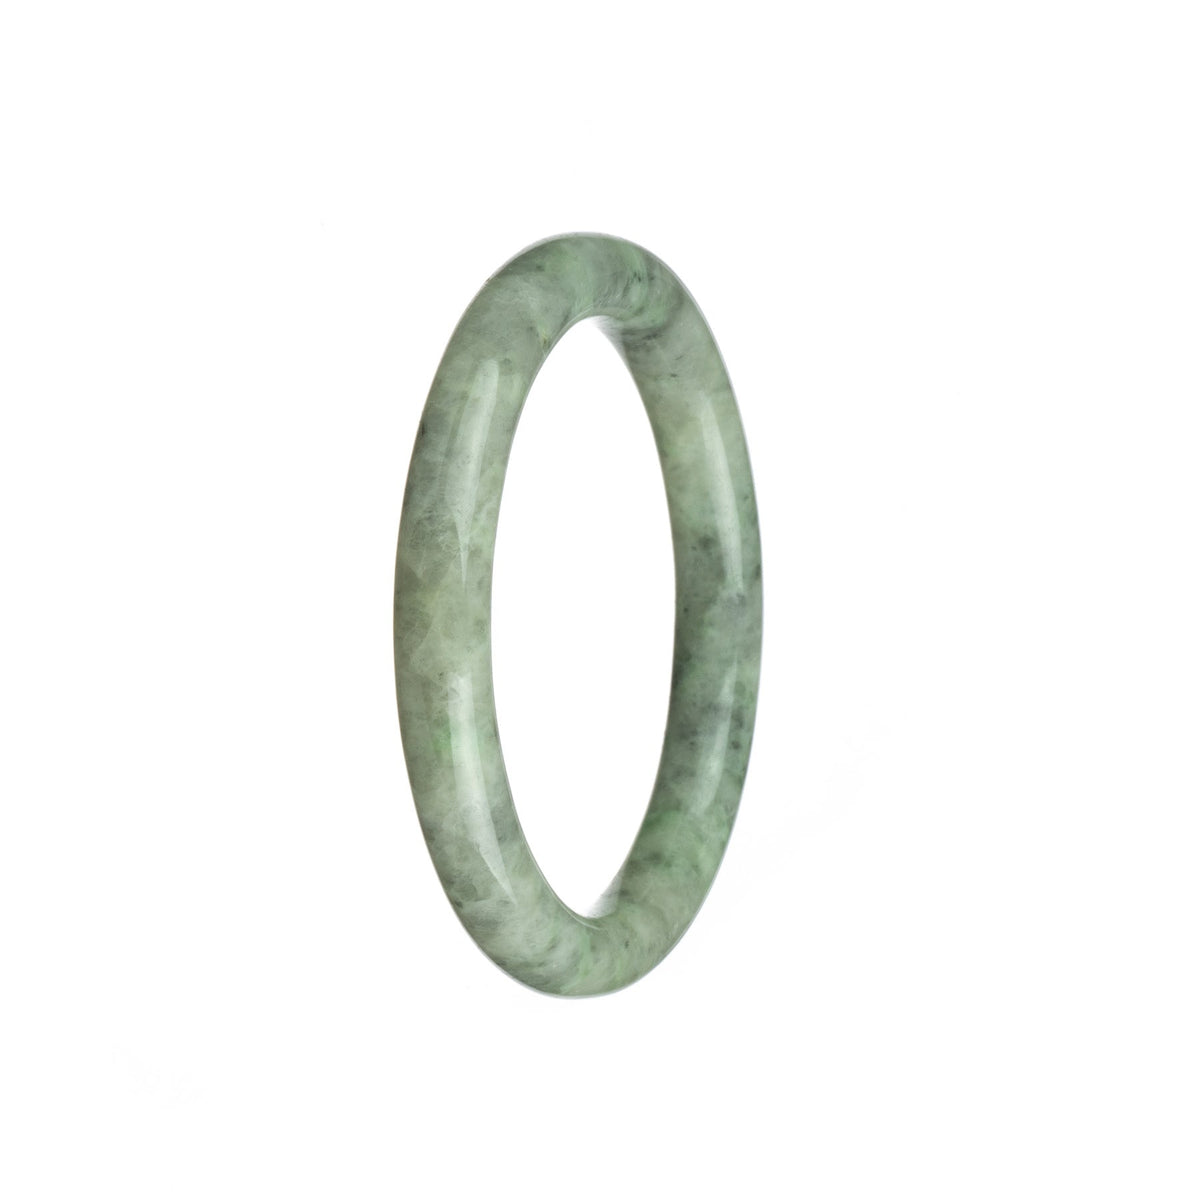 An elegant grey and white jadeite jade bracelet with a petite round shape, showcasing its authentic and untreated beauty. Perfect for adding a touch of sophistication to any outfit.